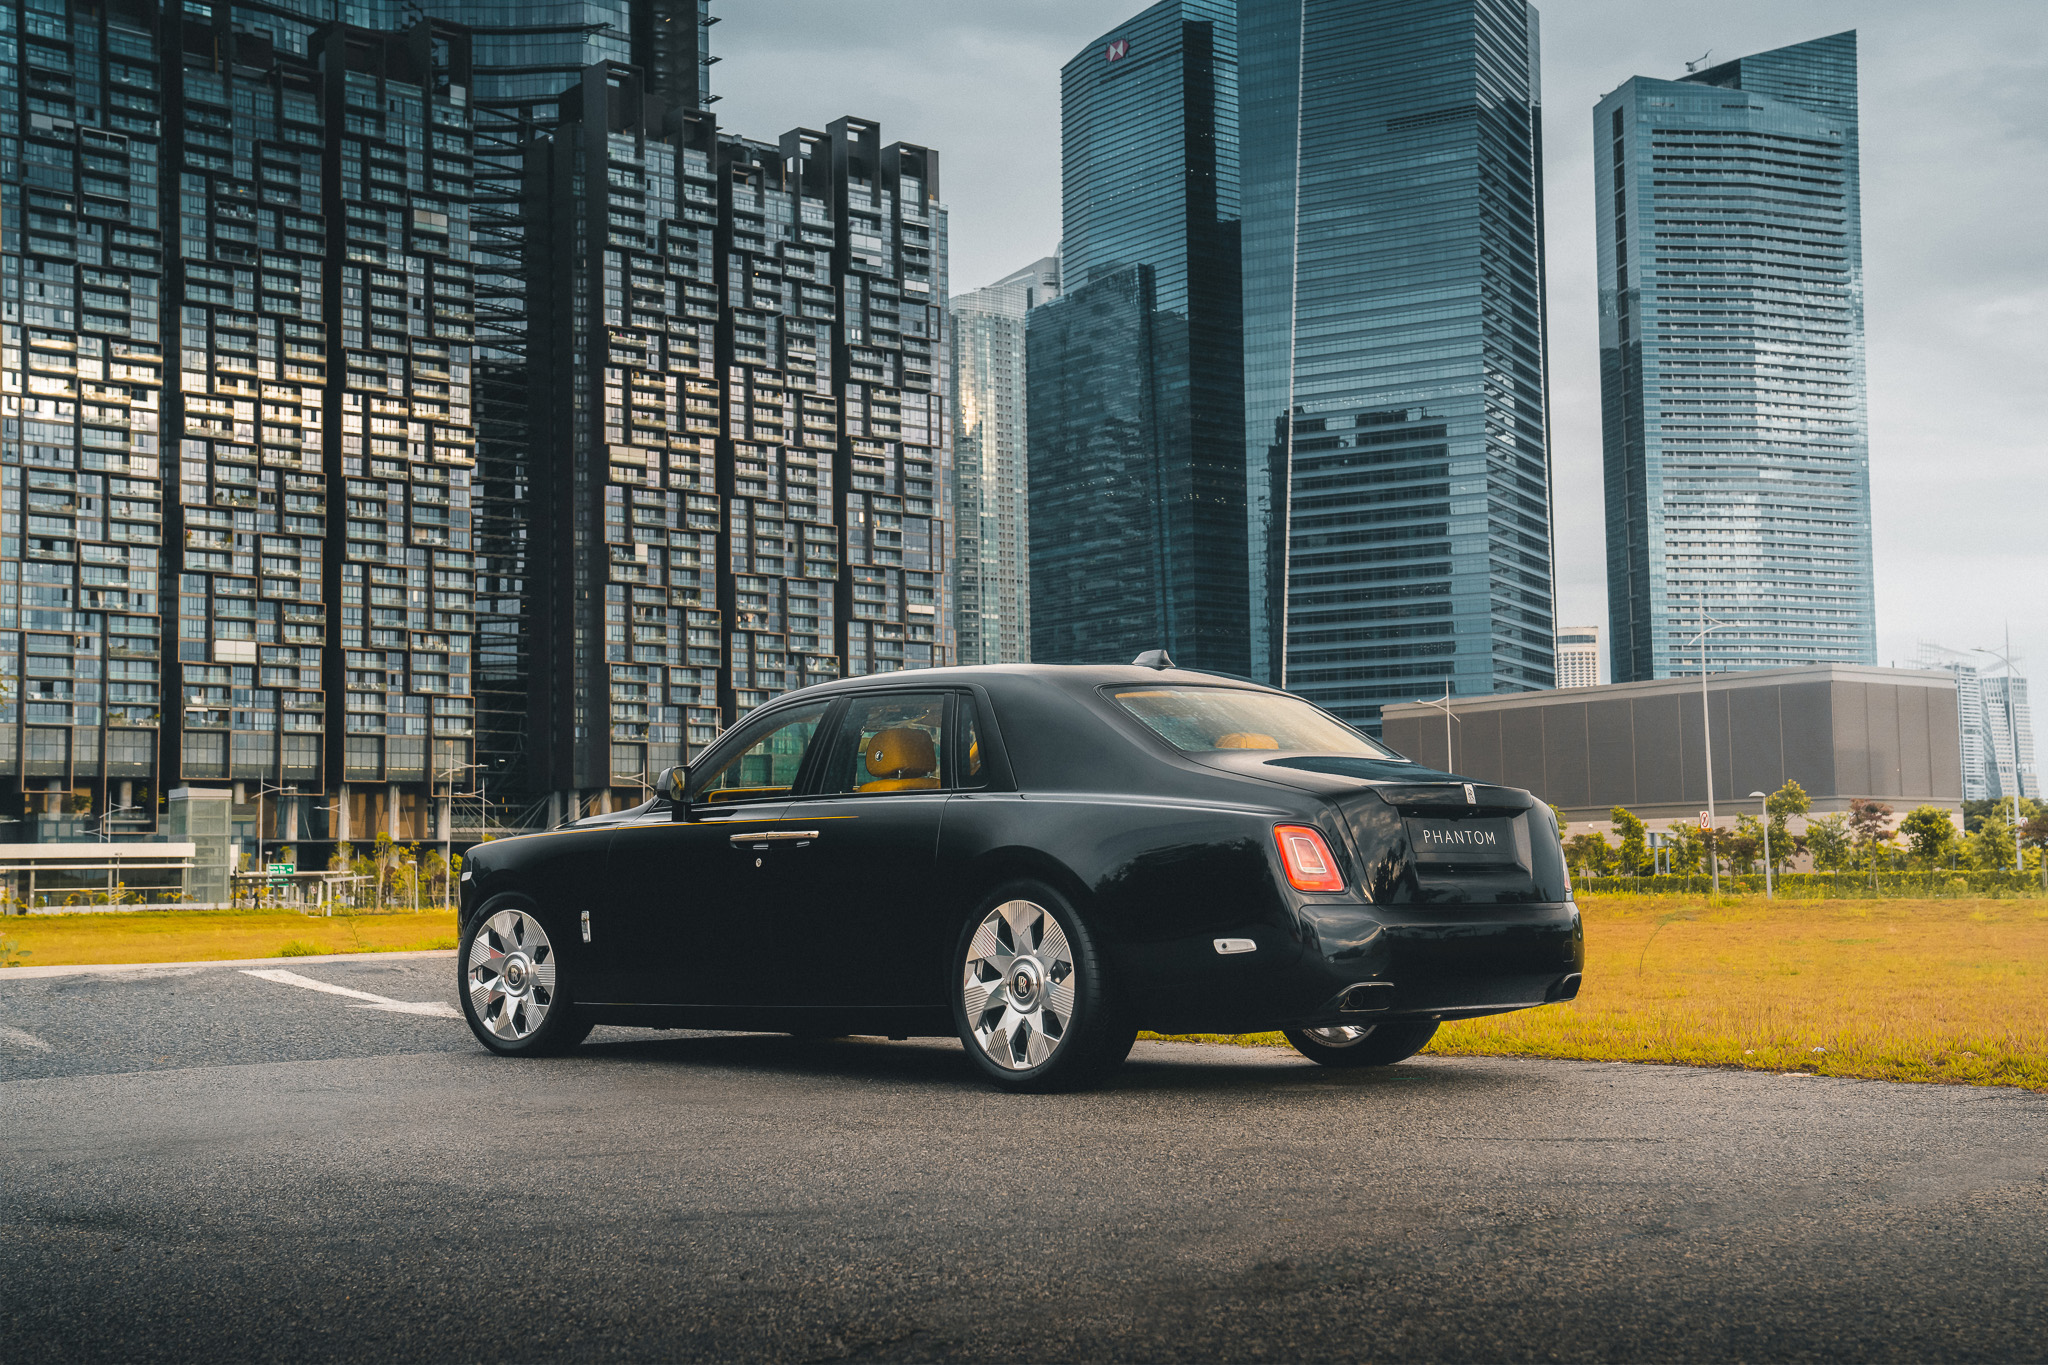 2014 ROLLSROYCE GHOST  LHD for sale by auction in London United Kingdom